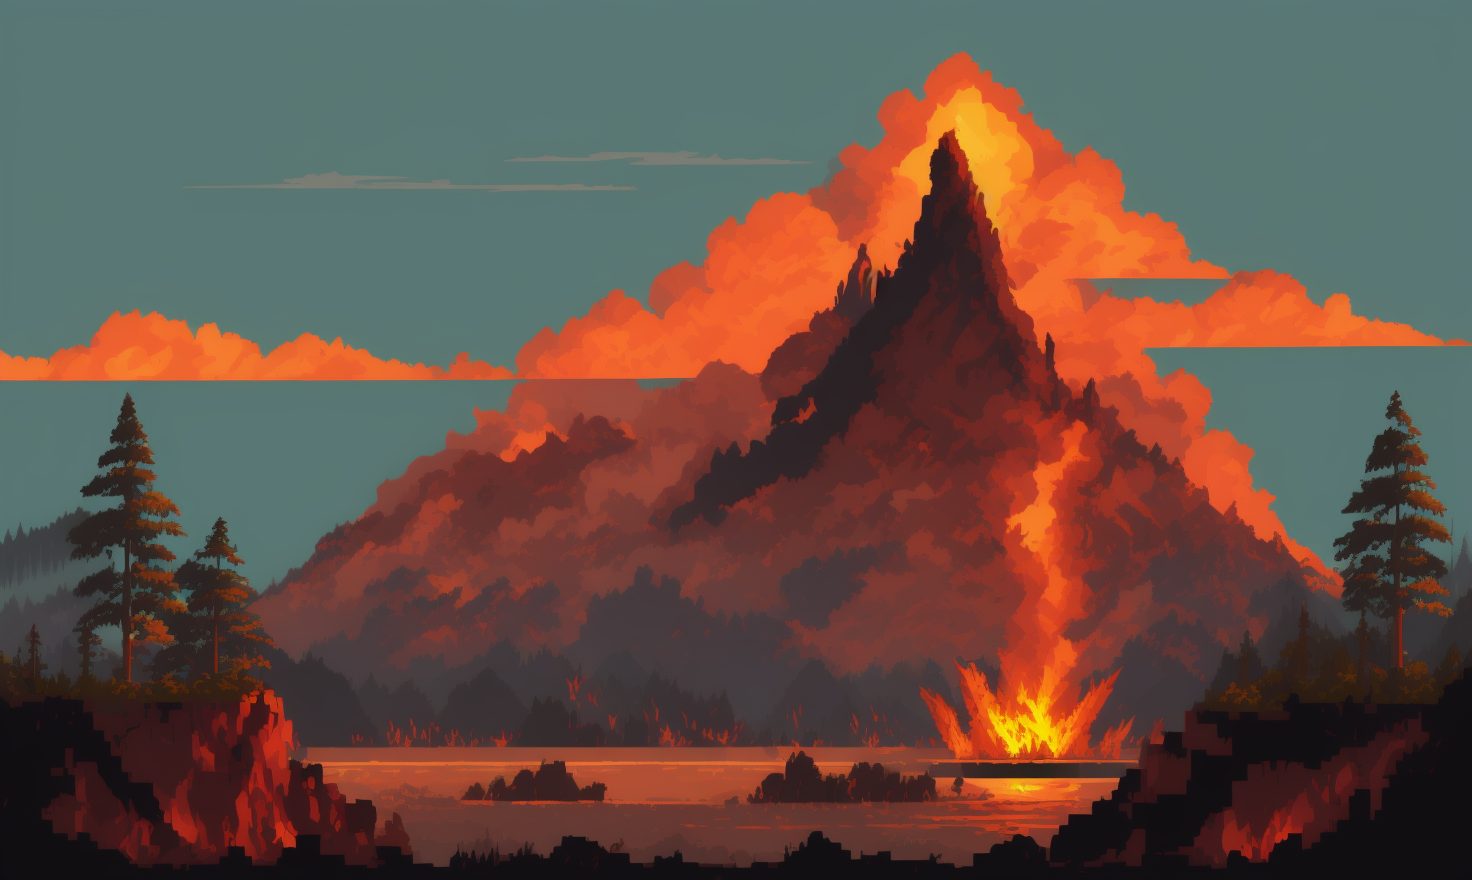 pixelart  video game environment, Create an image of a dangerous and unpredictable volcano, with flowing lava, ash clouds,...